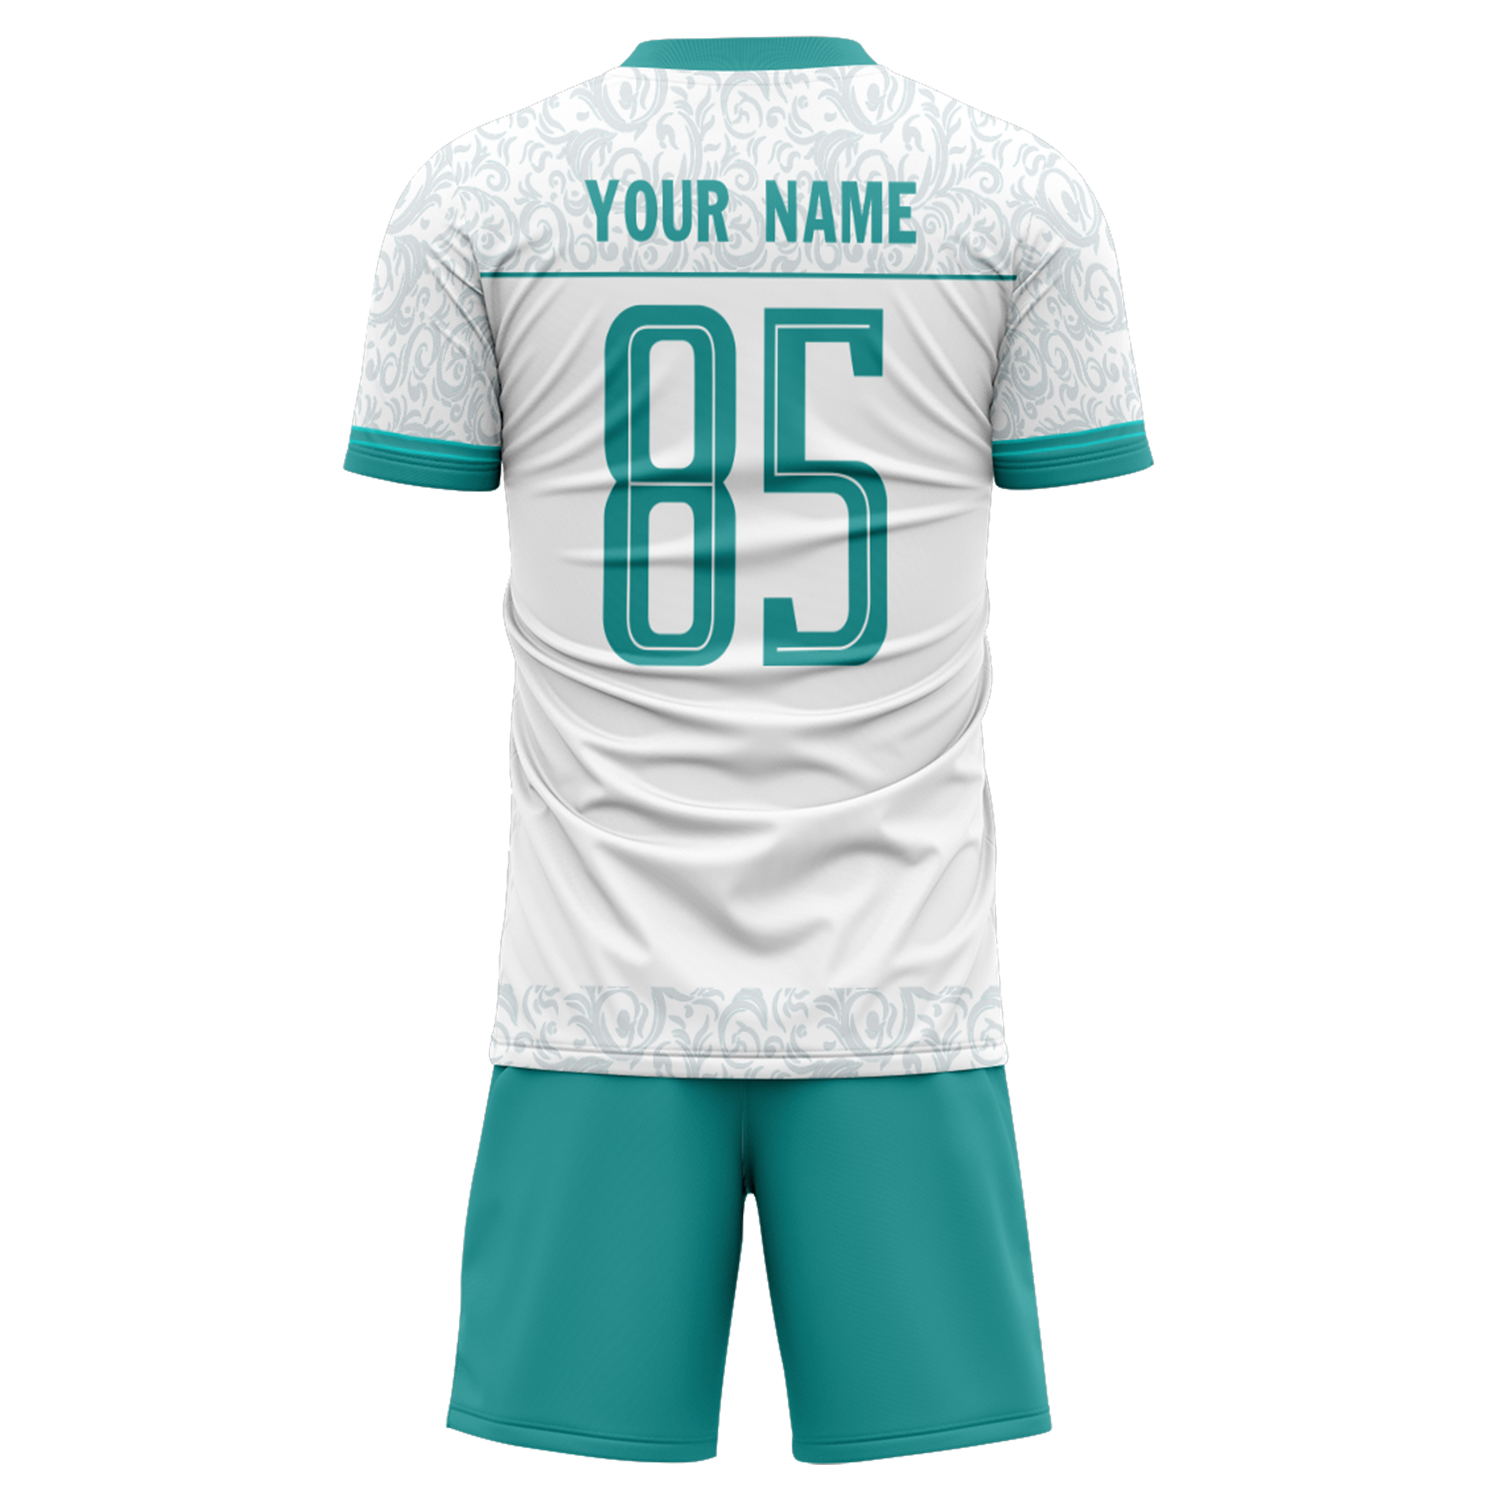 Custom Cameroon Team Football Suits Personalized Design Print on Demand Soccer Jerseys